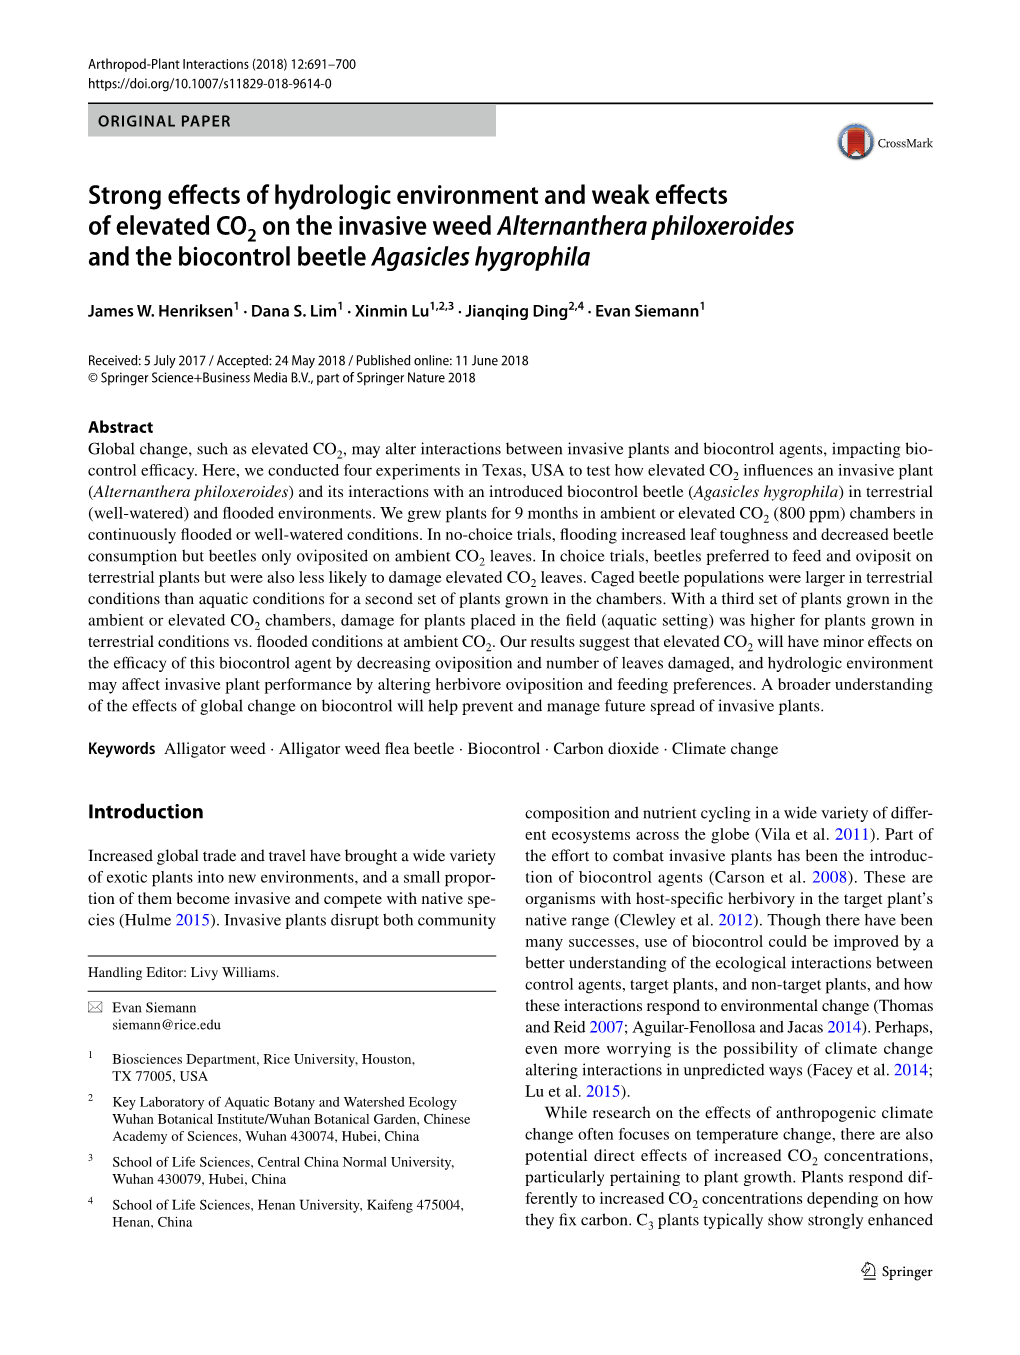 Strong Effects of Hydrologic Environment and Weak Effects of Elevated CO2 on the Invasive Weed Alternanthera Philoxeroides and T